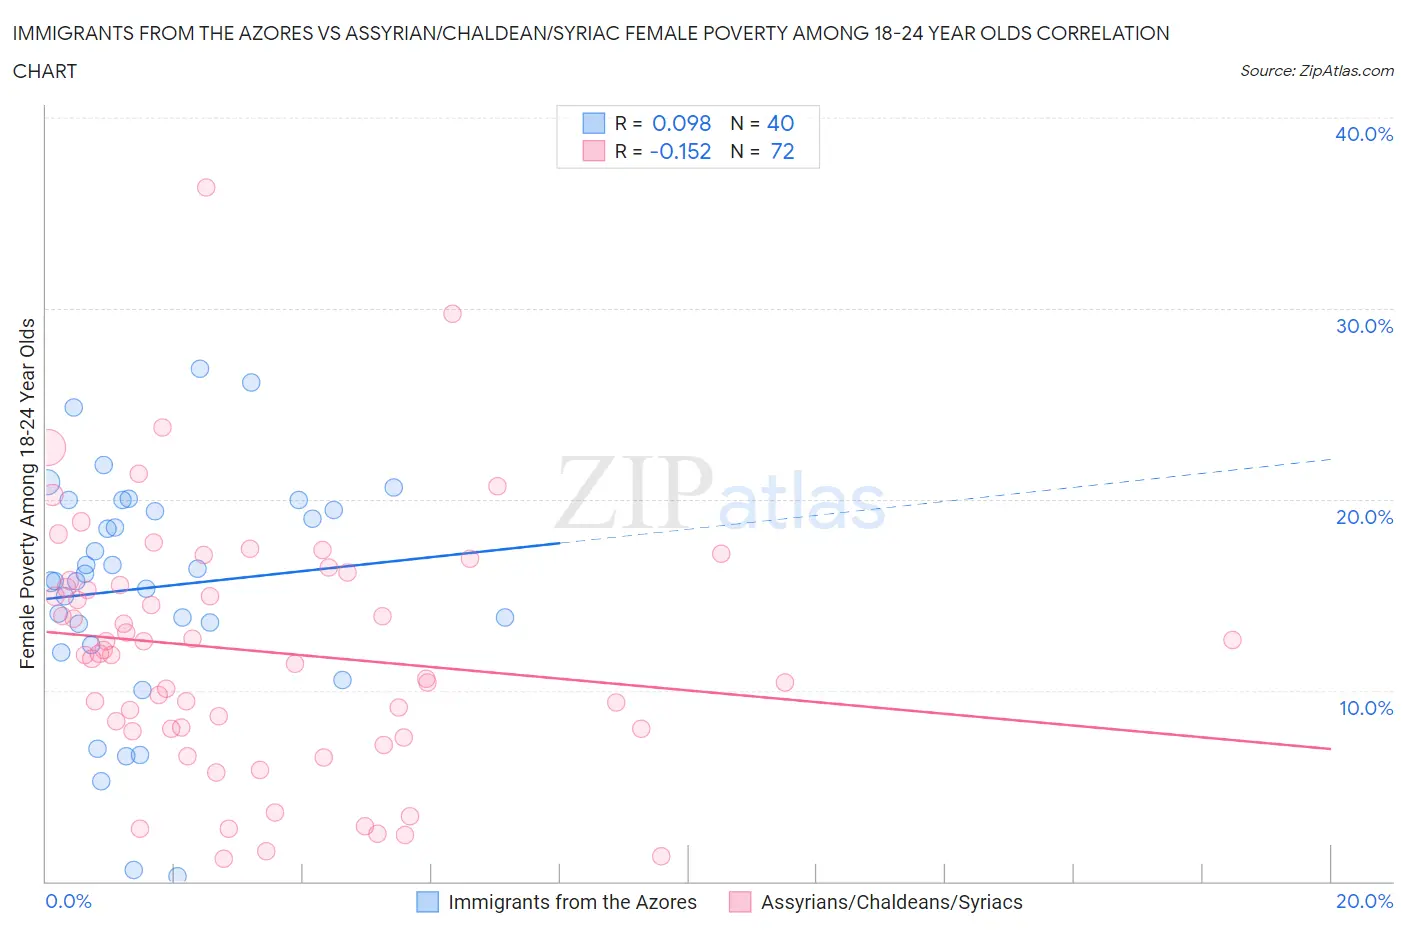 Immigrants from the Azores vs Assyrian/Chaldean/Syriac Female Poverty Among 18-24 Year Olds